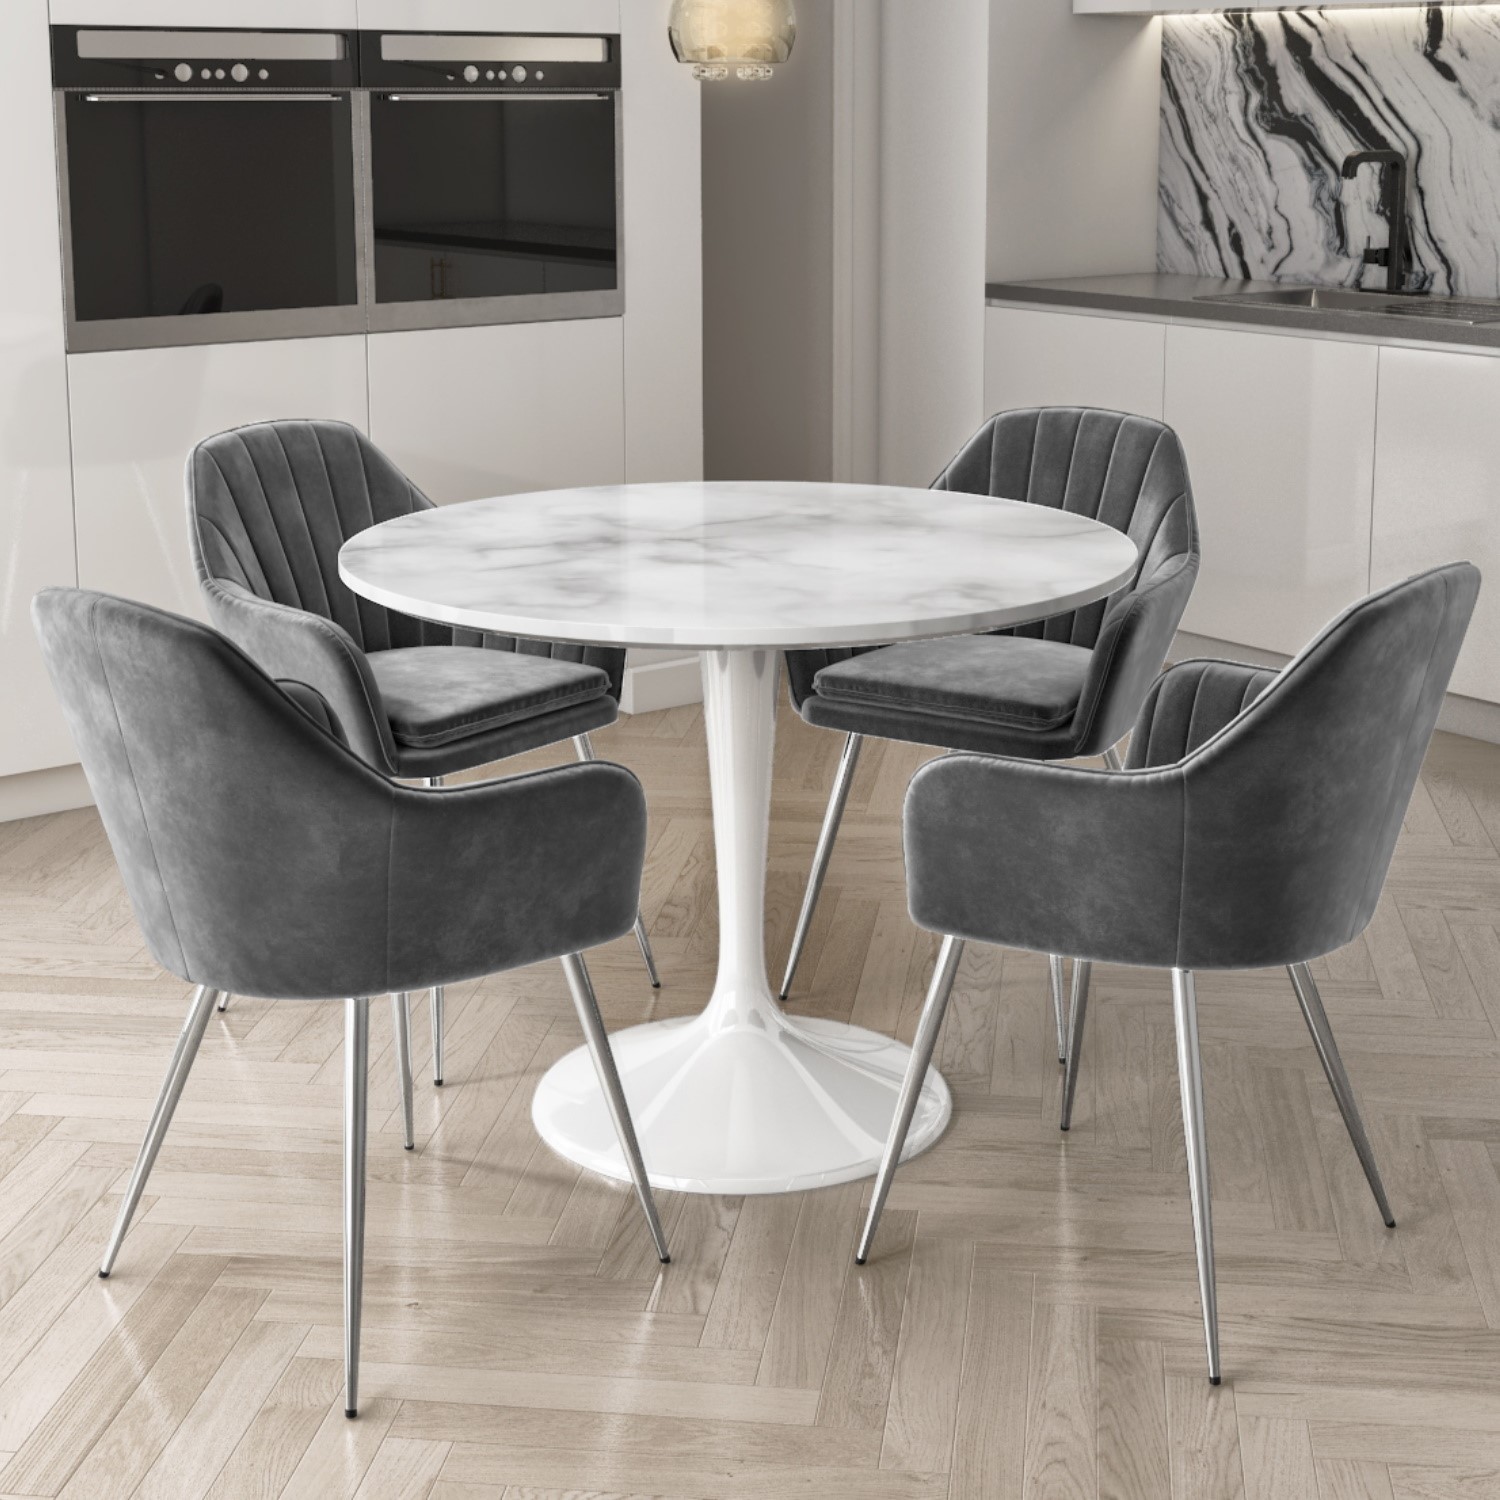 Aura Round White Faux Marble Dining Table With 4 Grey Velvet Dining Tub Chairs With Chrome Legs Furniture123